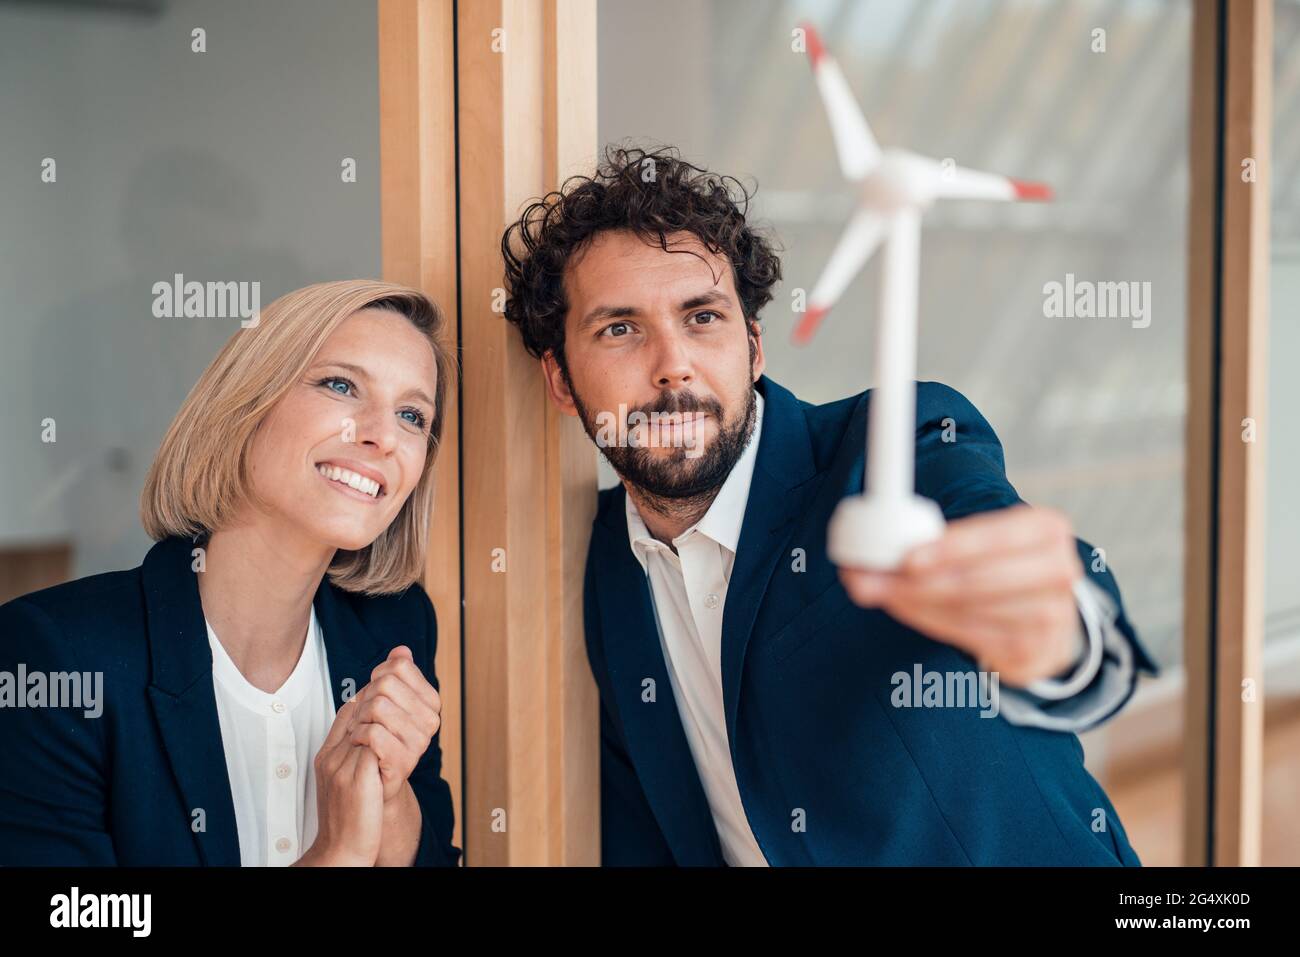 Professional team looking at wind turbine model in office Stock Photo